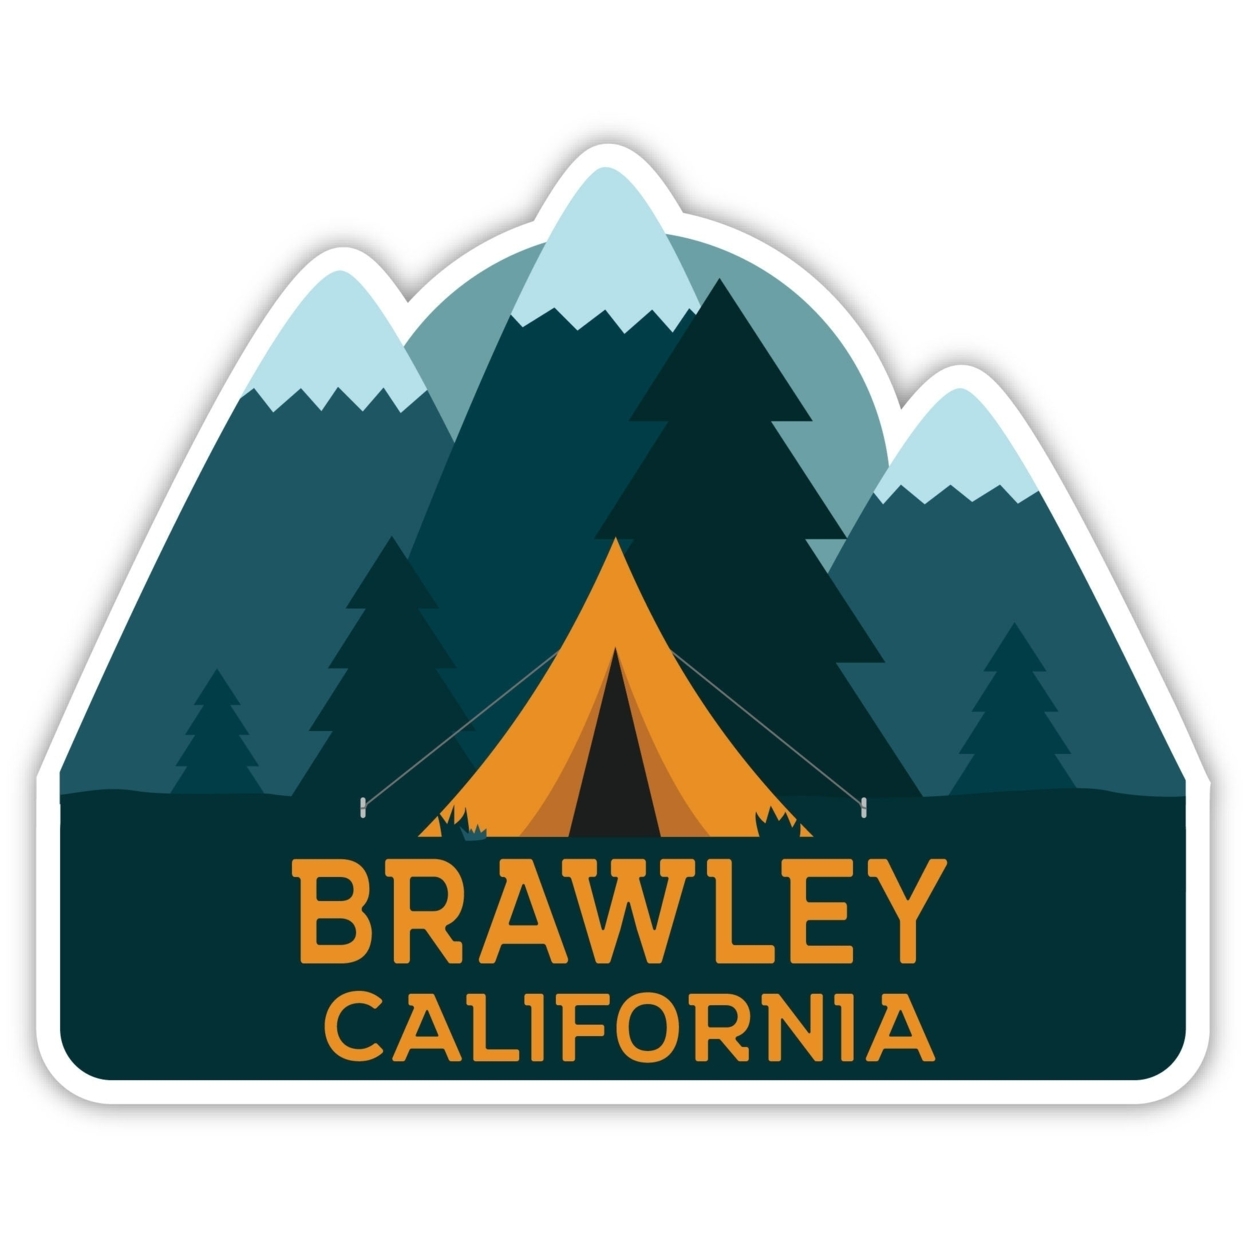 Brawley California Souvenir Decorative Stickers (Choose Theme And Size) - 4-Pack, 8-Inch, Tent